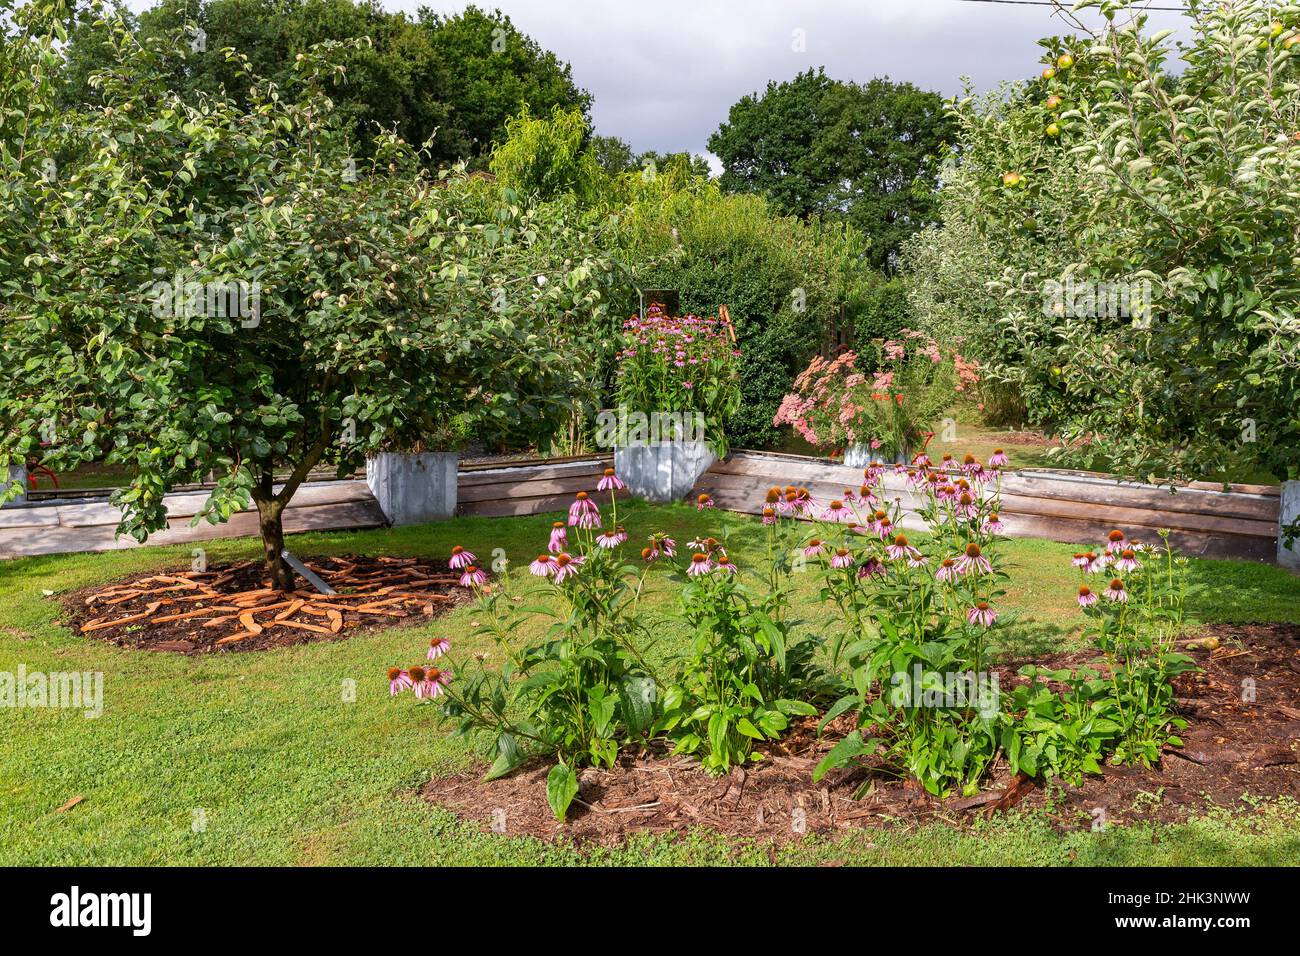 Rocambole gardens, Artistic vegetable and botanical gardens in organic farming, A meeting between art and Nature, flower beds, in flowerbed, La Lande Stock Photo